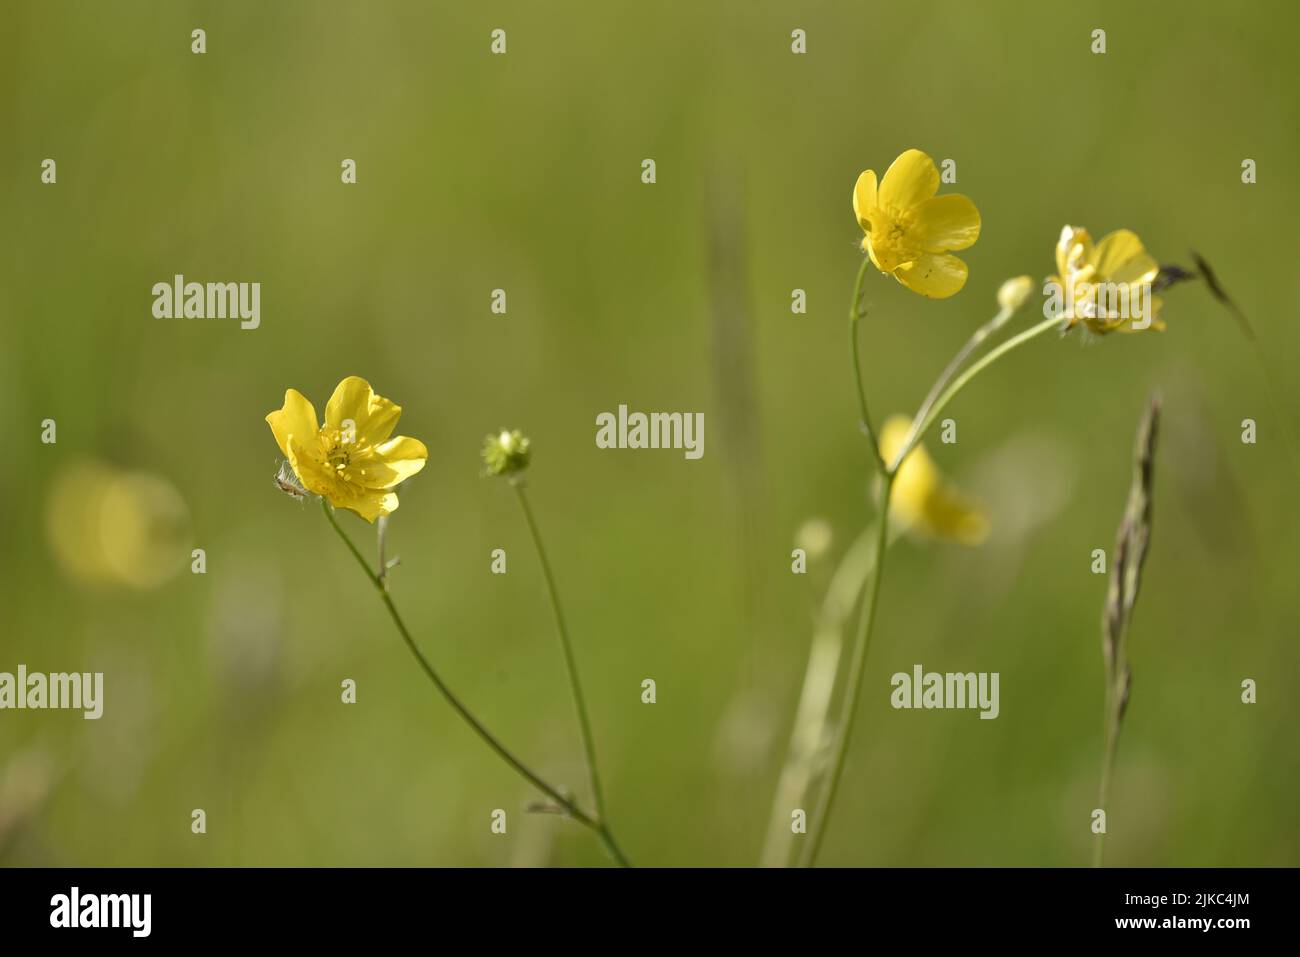 Sunlit Meadow Buttercups (Ranunculus acis) against a Soft Focus Green Background, Taken at Close Sartfield, Isle of Man, UK in June Stock Photo